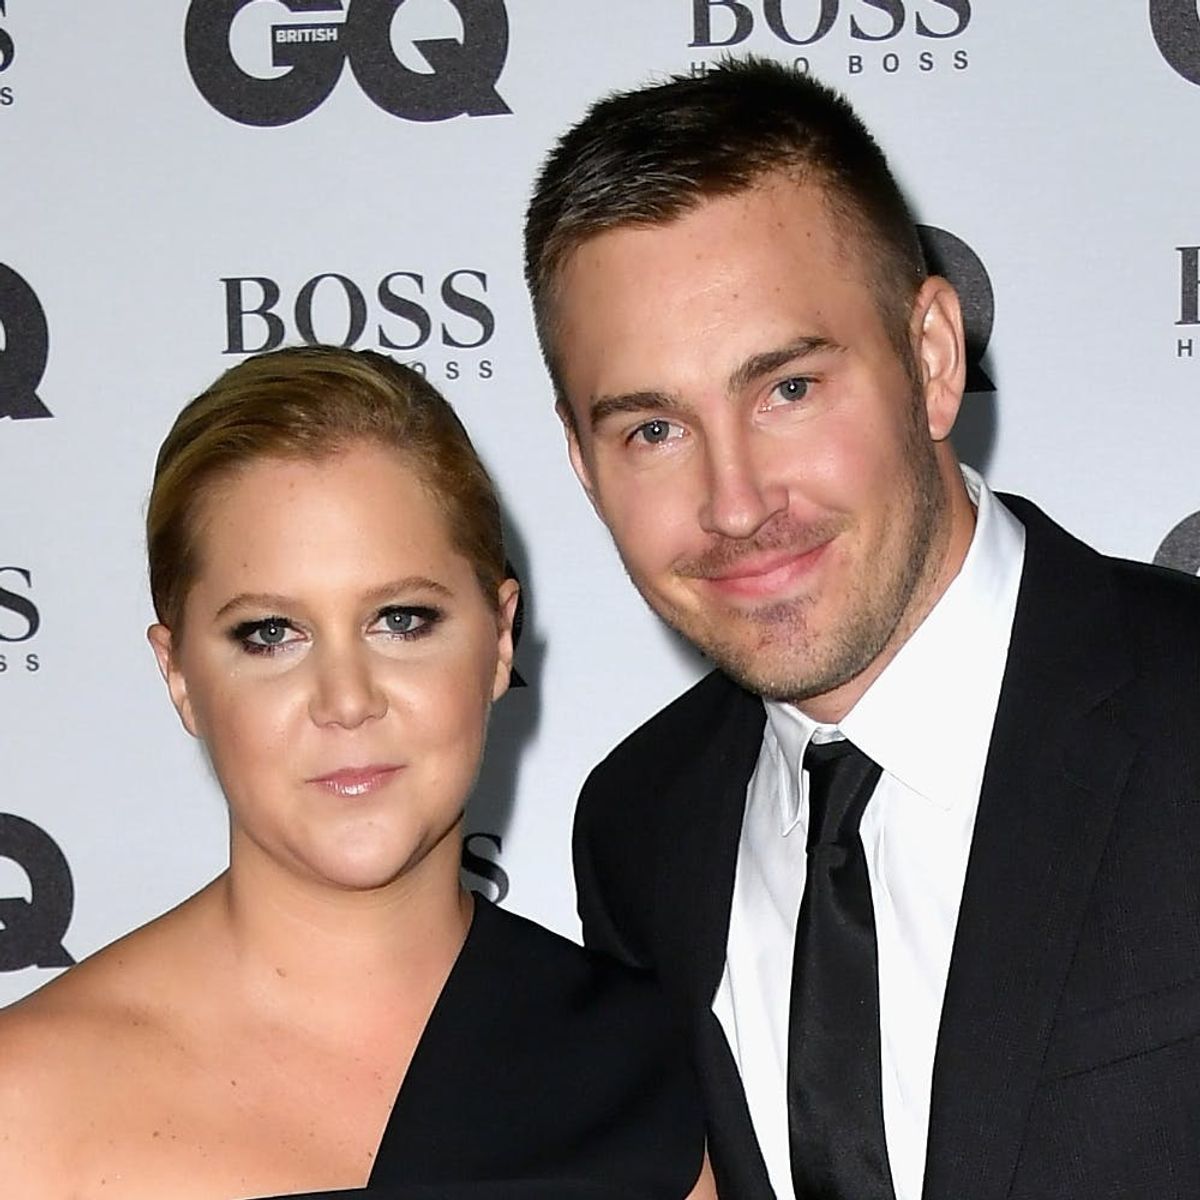 Did Amy Schumer Use Her Boyfriend for Red Carpet Damage Control?